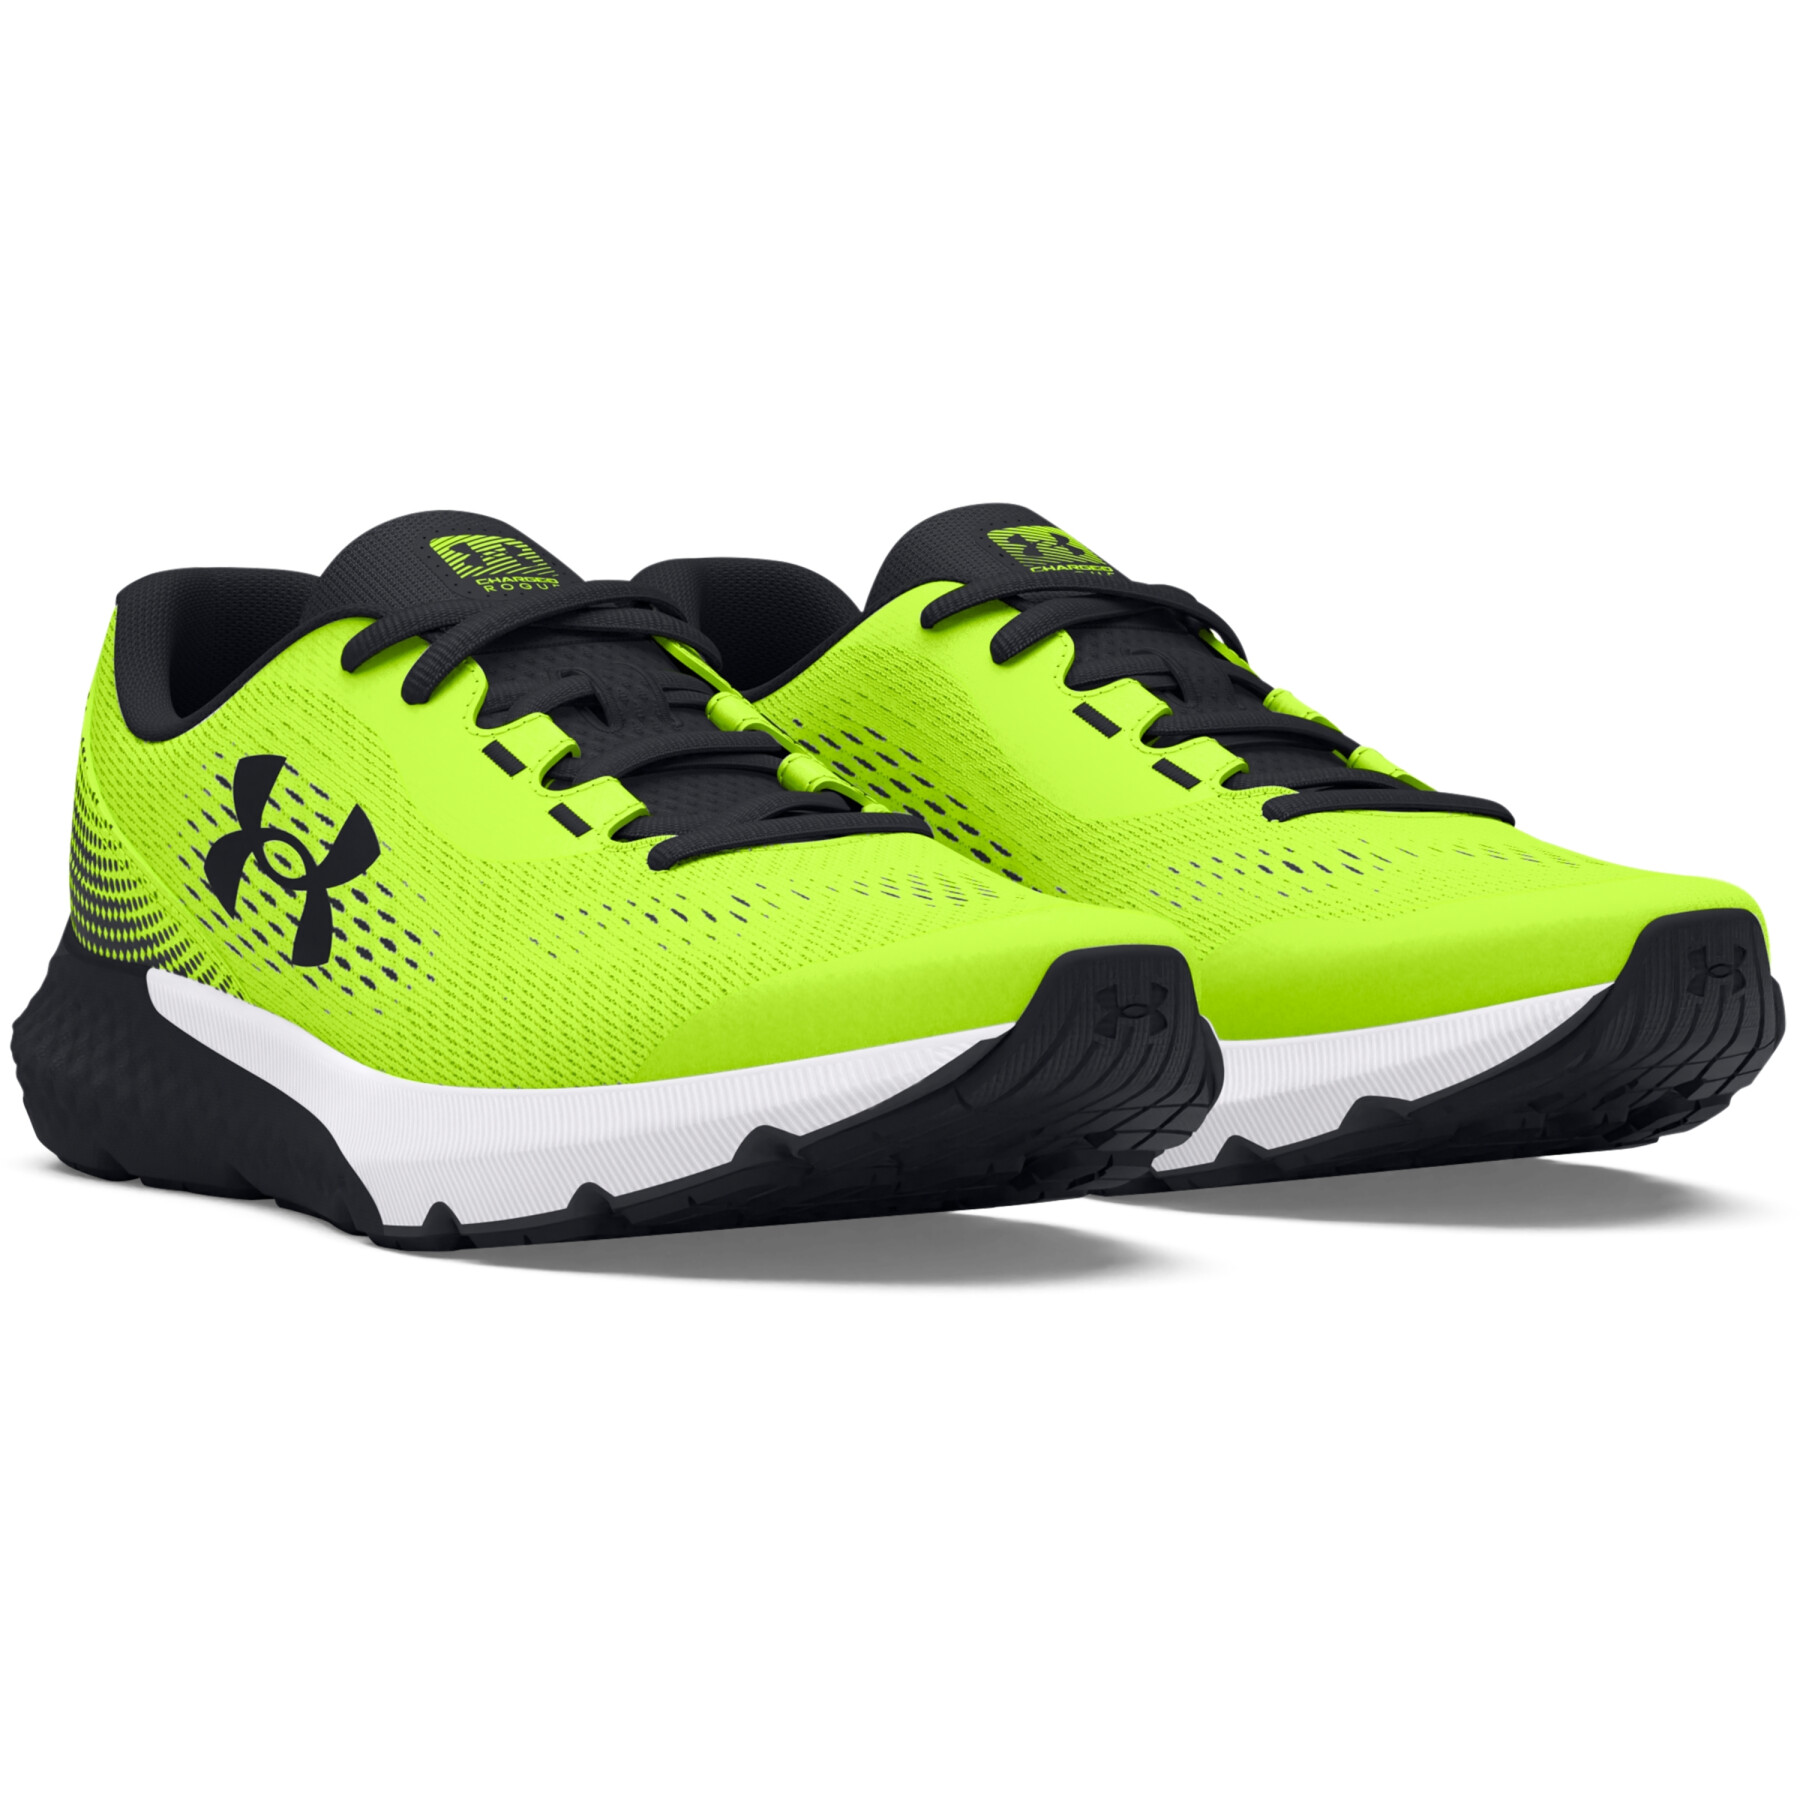 Chaussures de running enfant Under Armour Charged Rogue 4